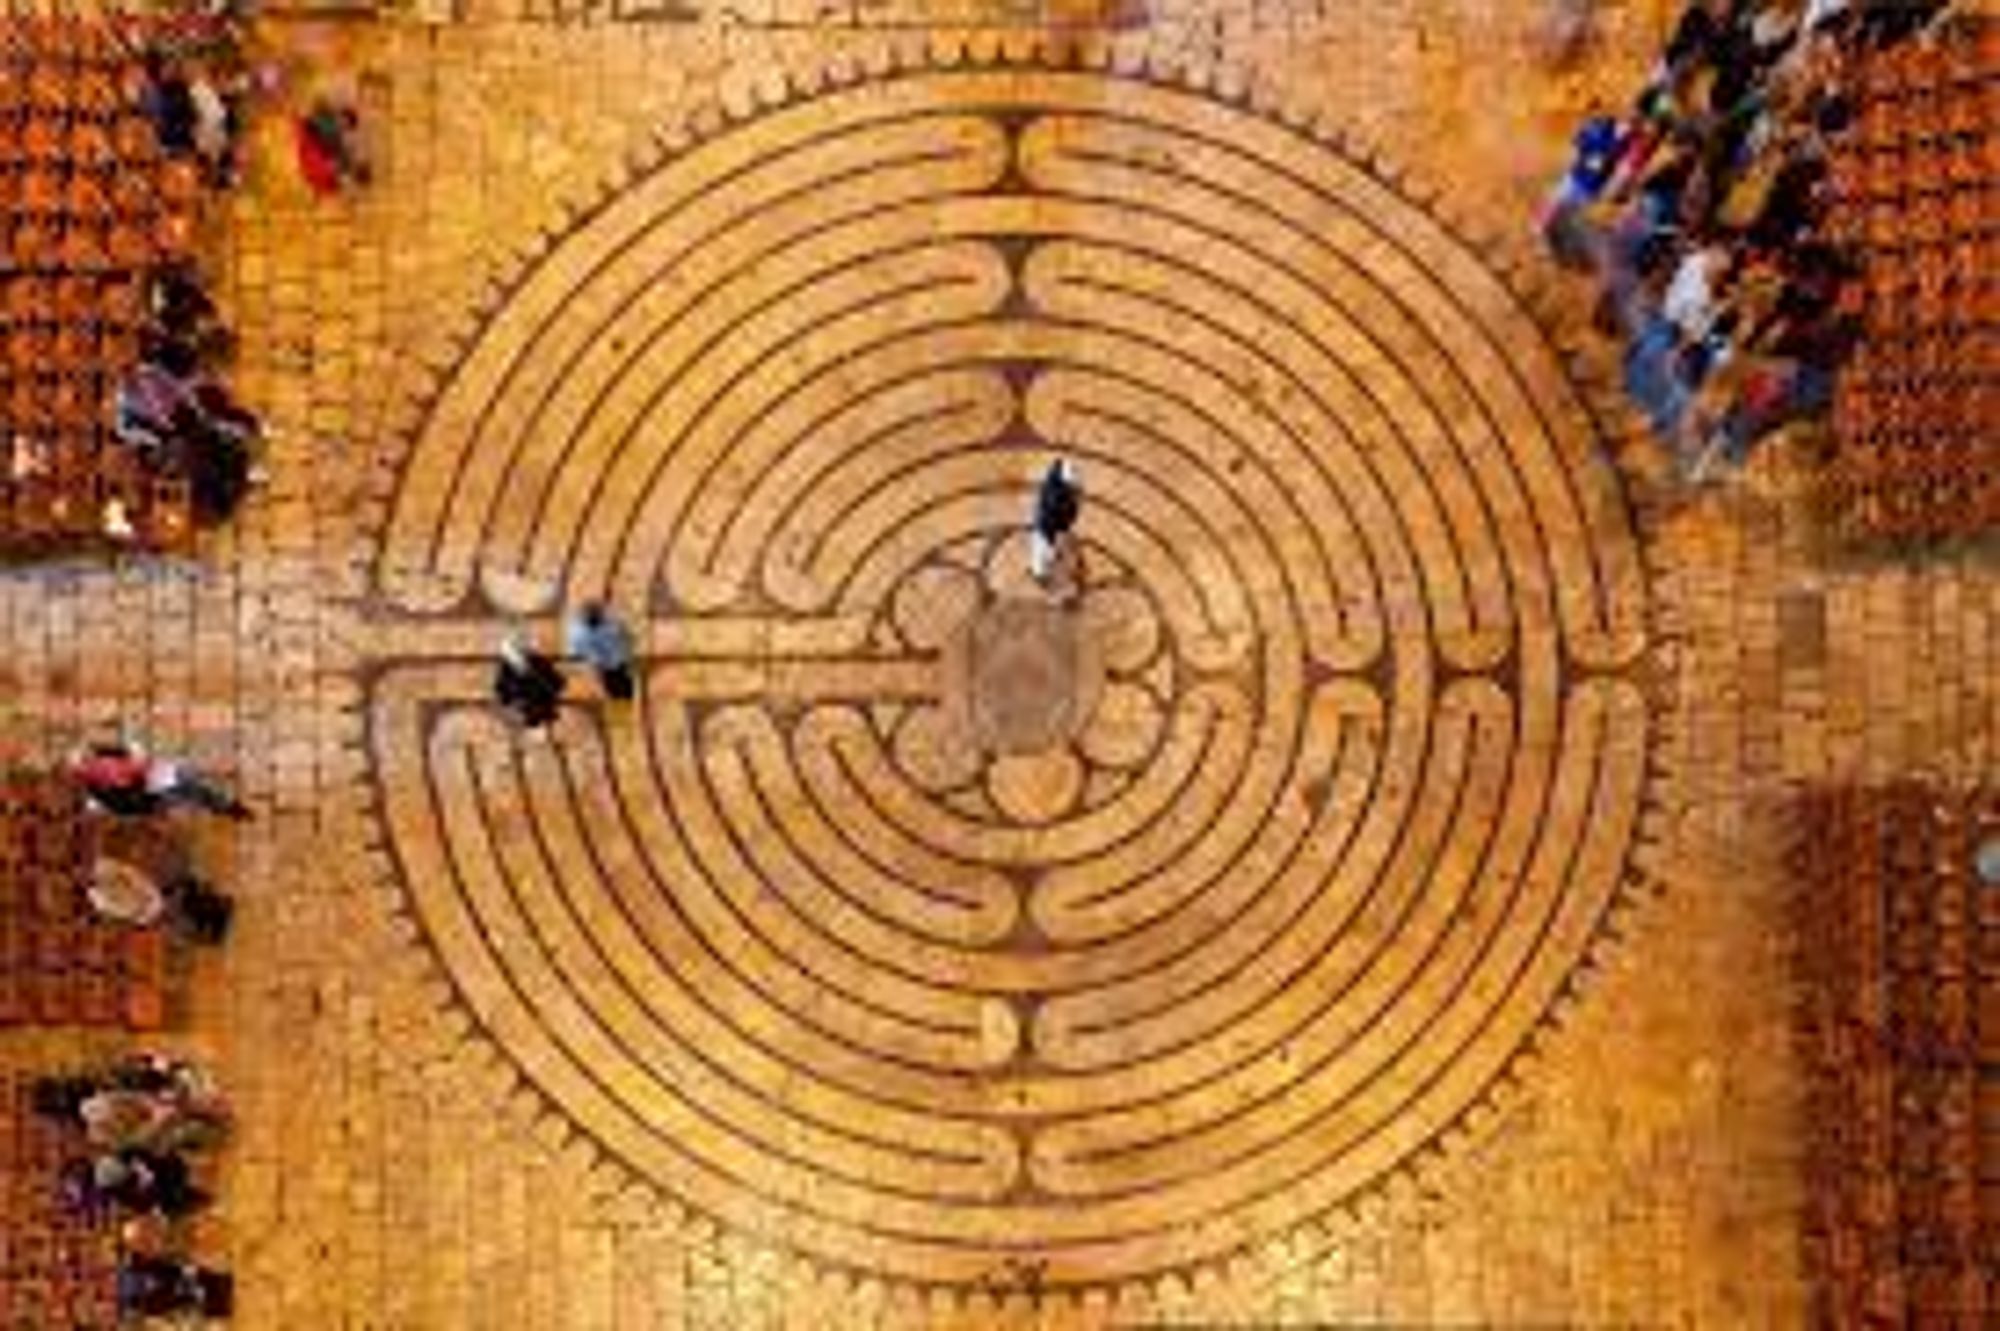 Overhead photograph of the labyrinth in the Cathedral at Chartres.